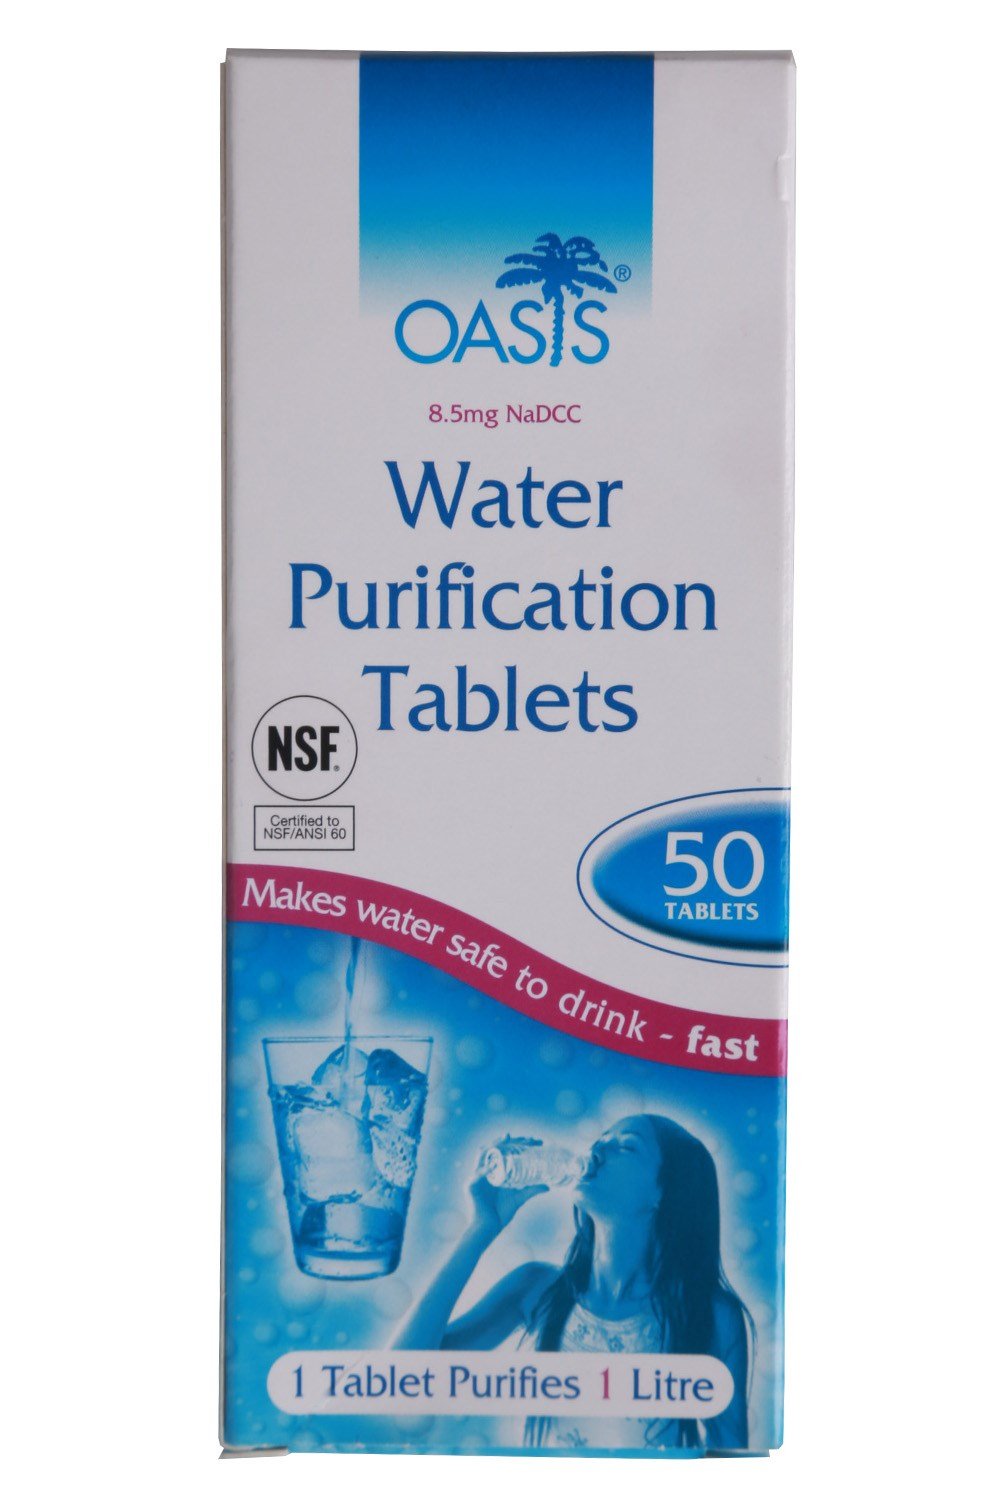 Oasis Water Purification Tablets - One